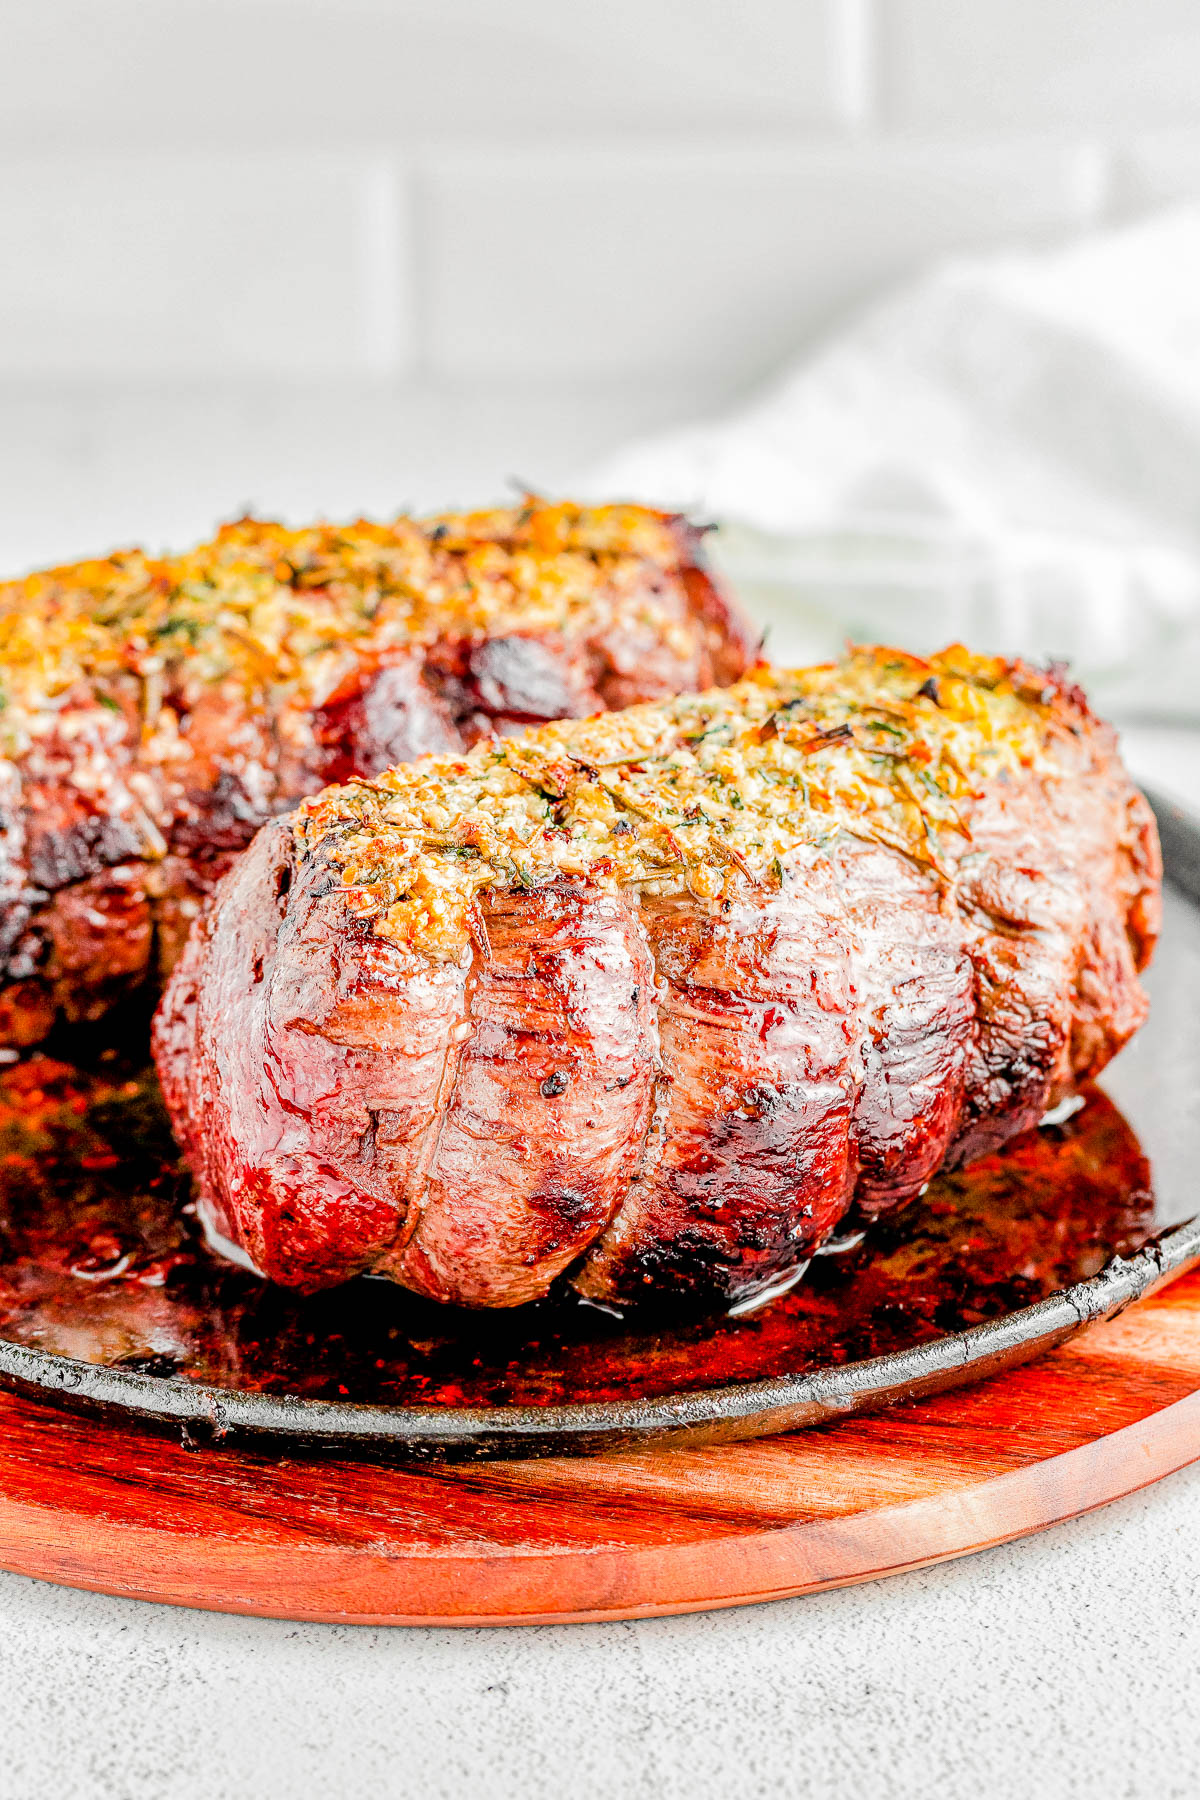 Easy Beef Tenderloin Roast with Garlic Herb Butter — An EASY yet IMPRESSIVE dish that’s ready in under an hour! Roasting beef tenderloin in the oven results in perfectly MOIST and TENDER meat every time, and the garlic herb butter adds tons of flavor without overwhelming the beef. If cooking beef tenderloin intimidates you, follow this straightforward recipe!   